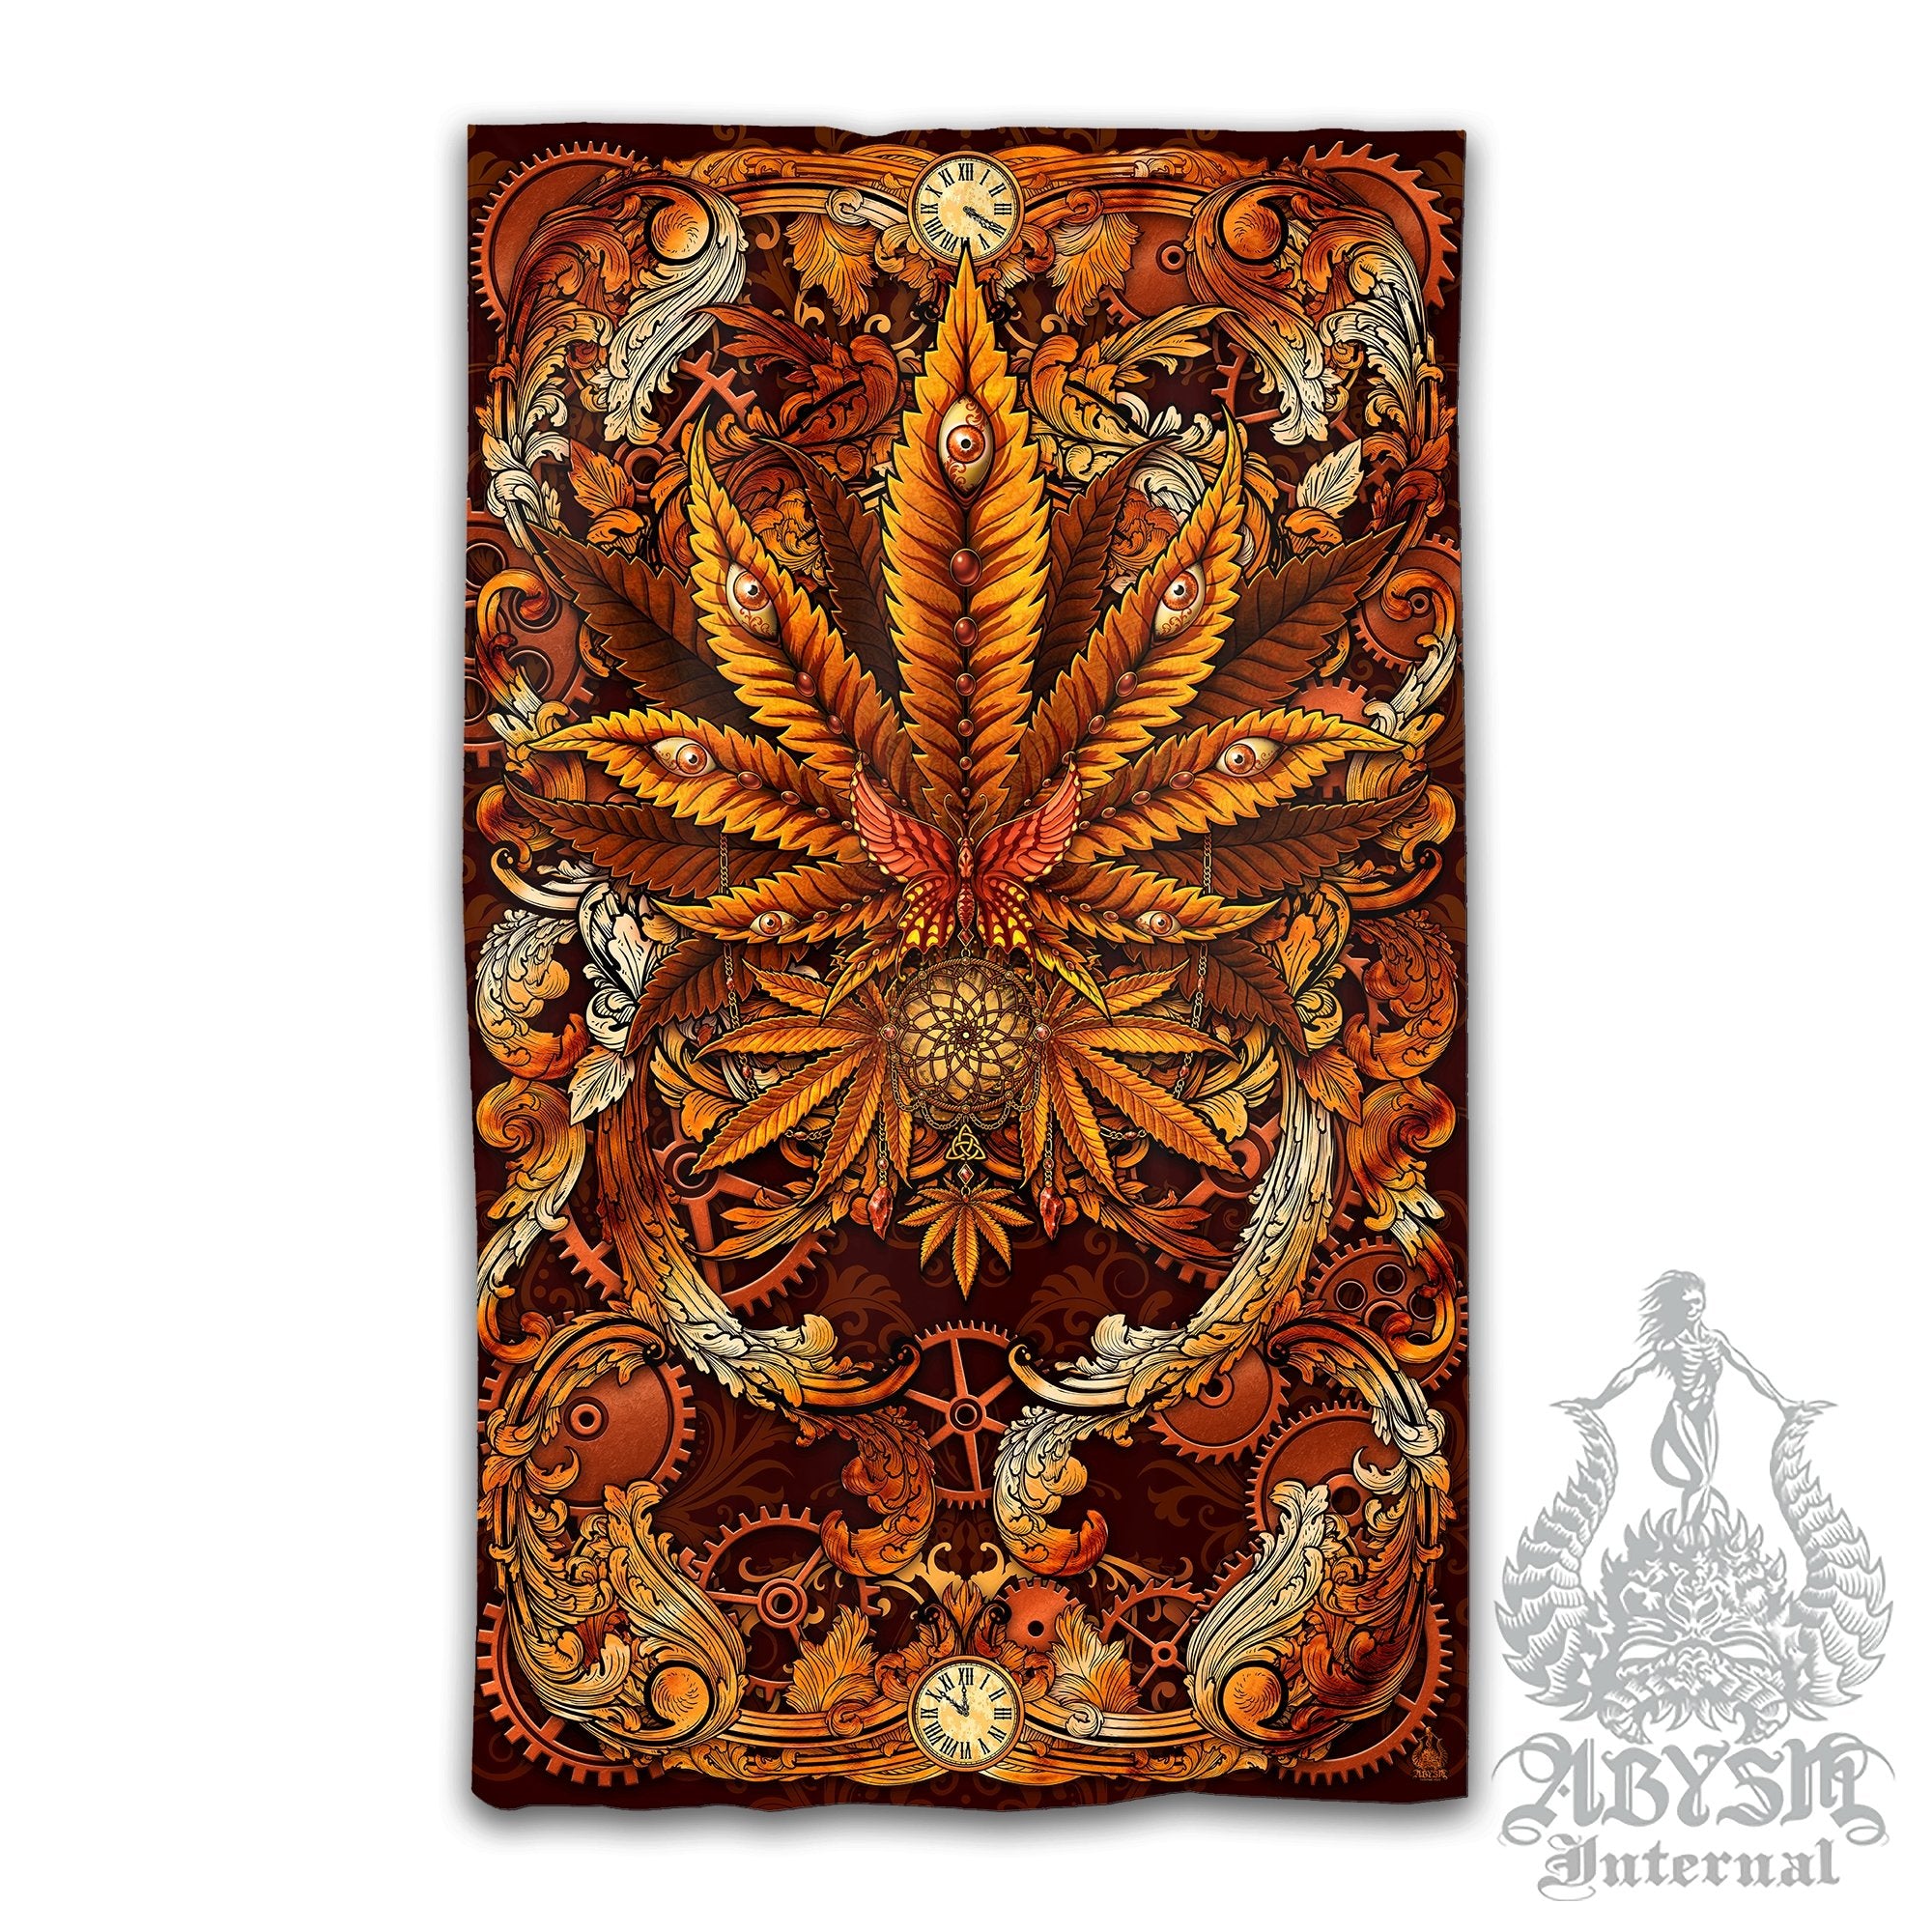 Weed Blackout Curtains, Cannabis Home and Shop Decor, Long Window Panels, Indie Print, 420 Room Art - Steampunk - Abysm Internal